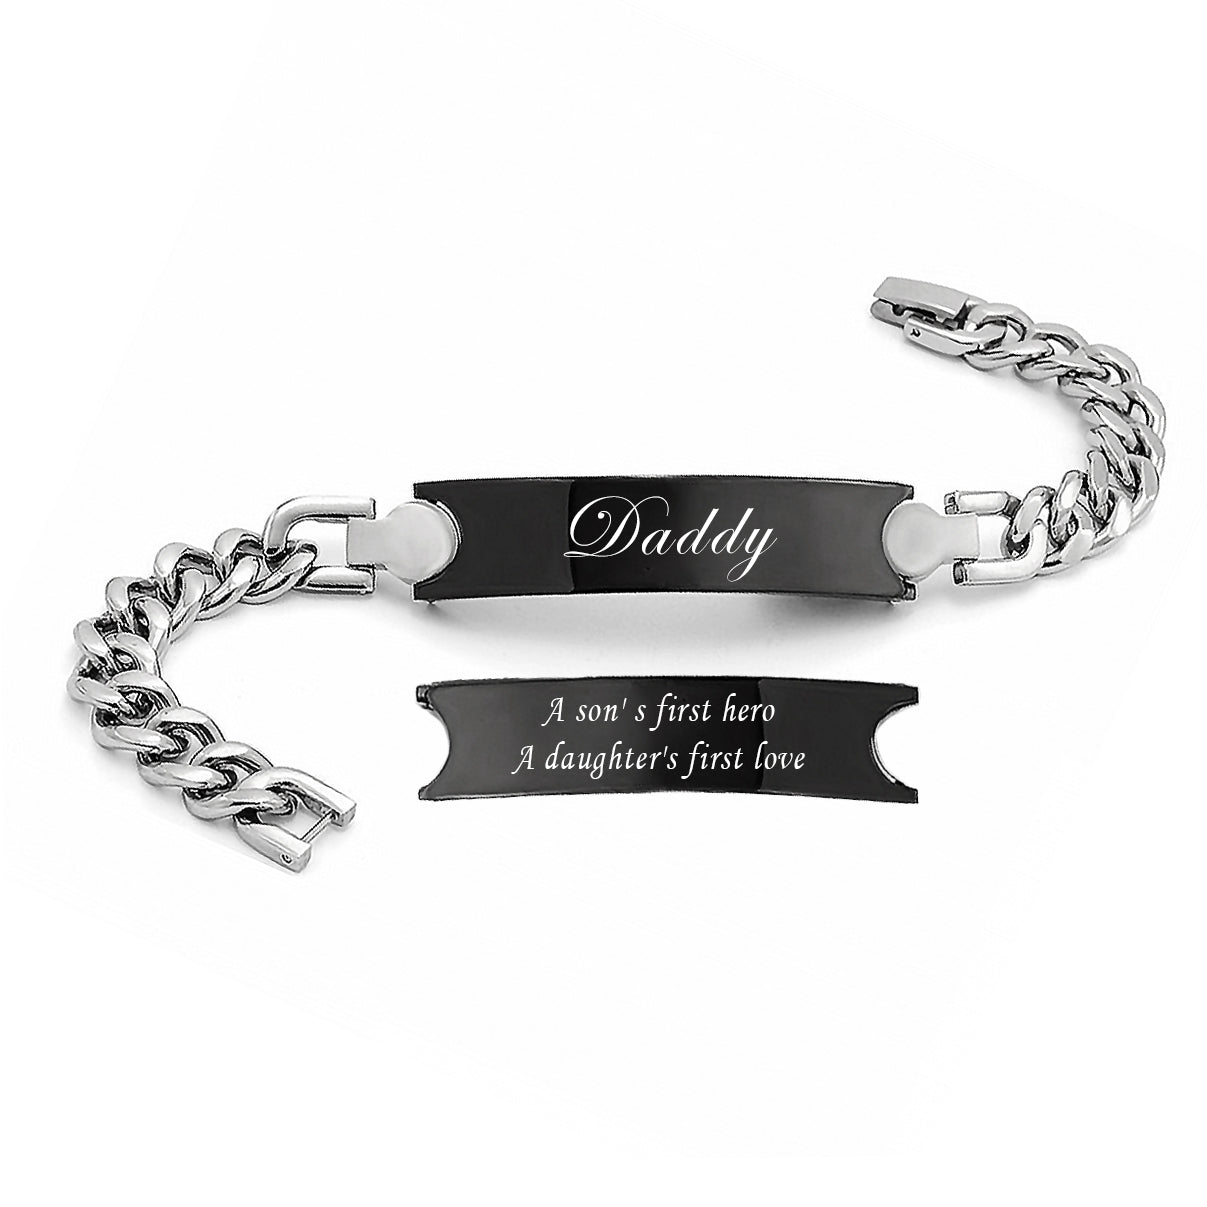 Personalized Engraved Stainless Steel Bracelet for Men,Perfect Gift for Father's Day, Birthday, Anniversary, Dad Jewelry for DAD